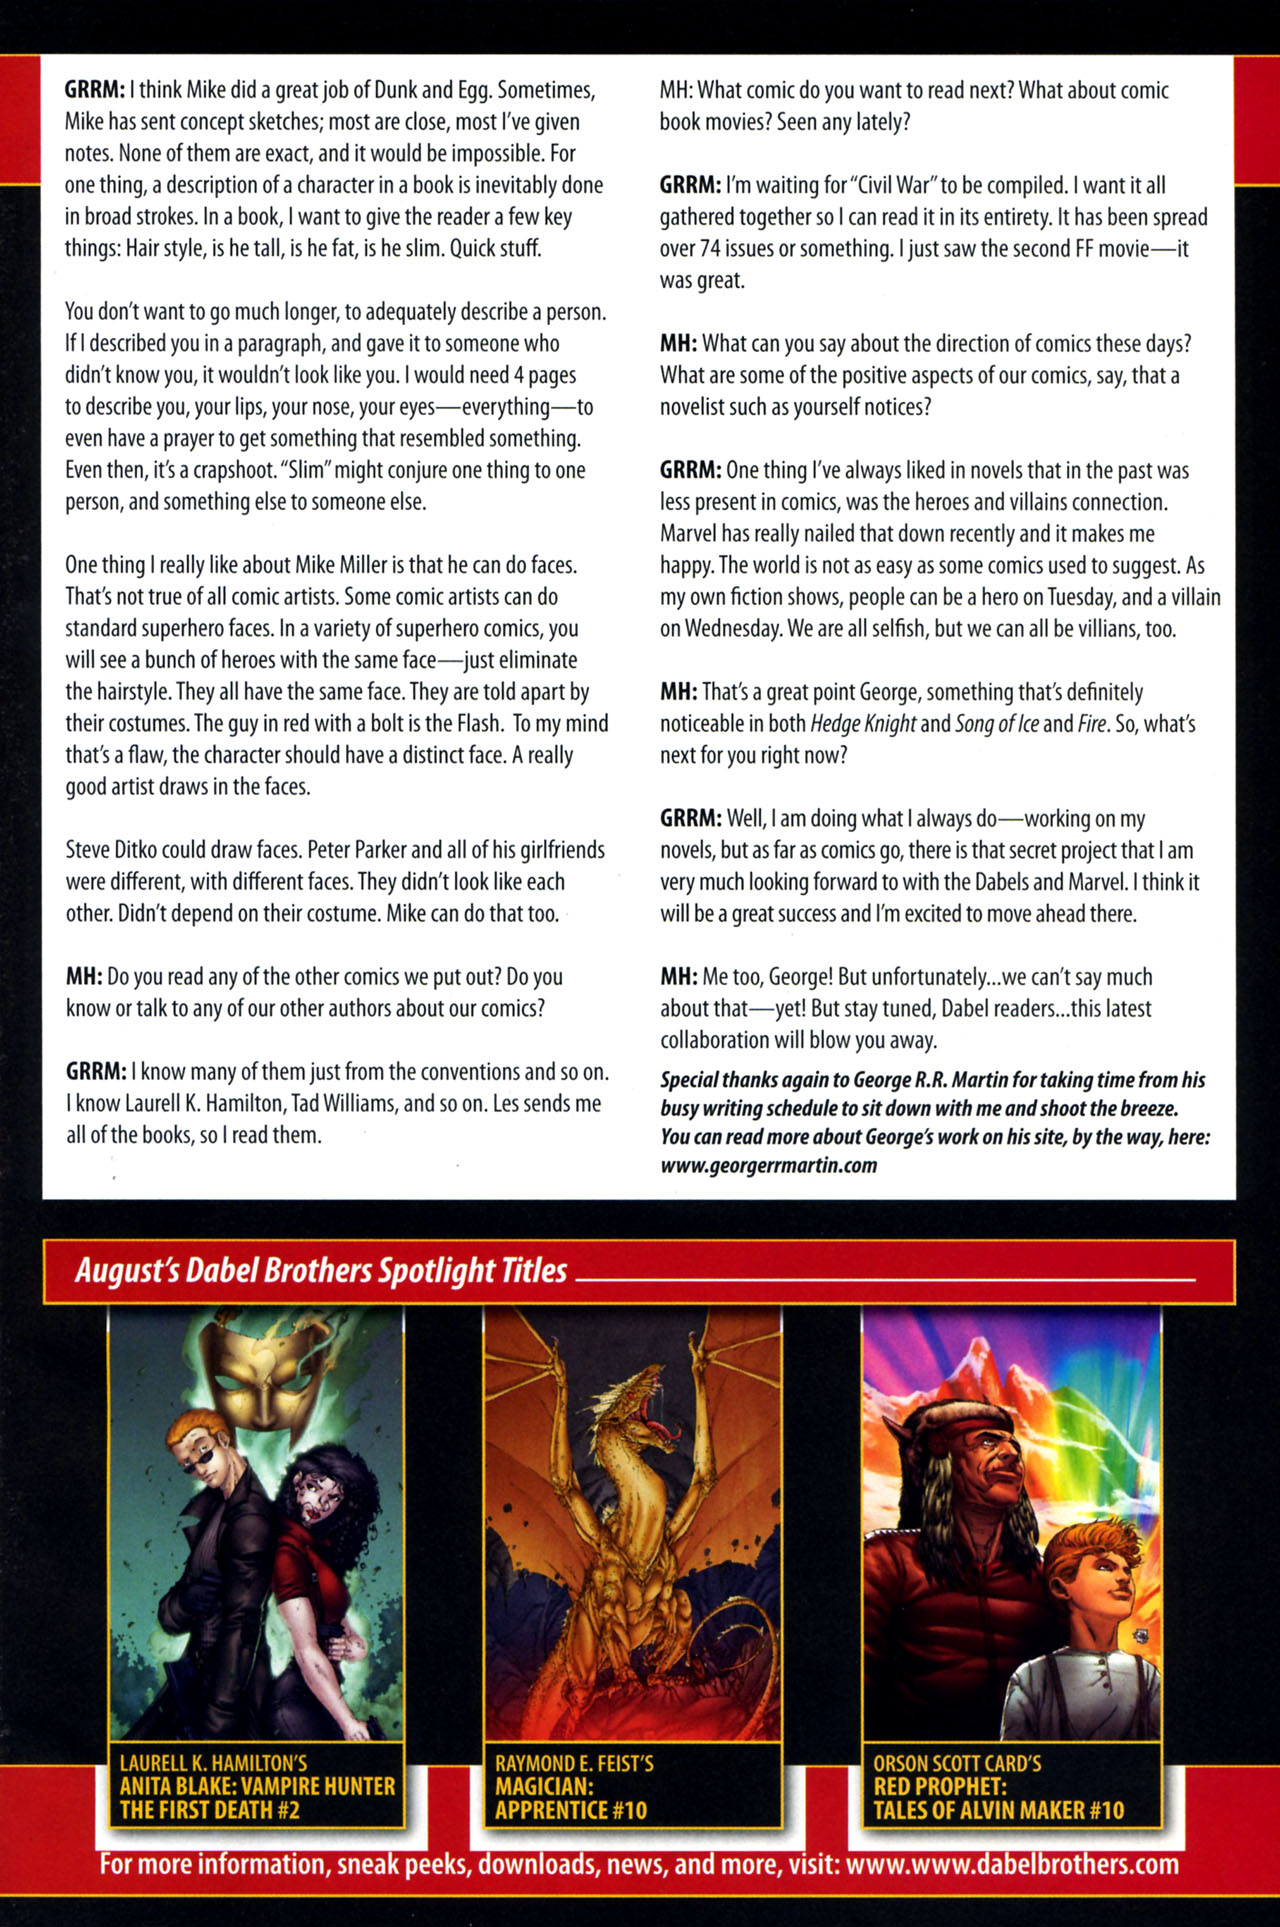 Read online Red Prophet: The Tales of Alvin Maker comic -  Issue #10 - 27